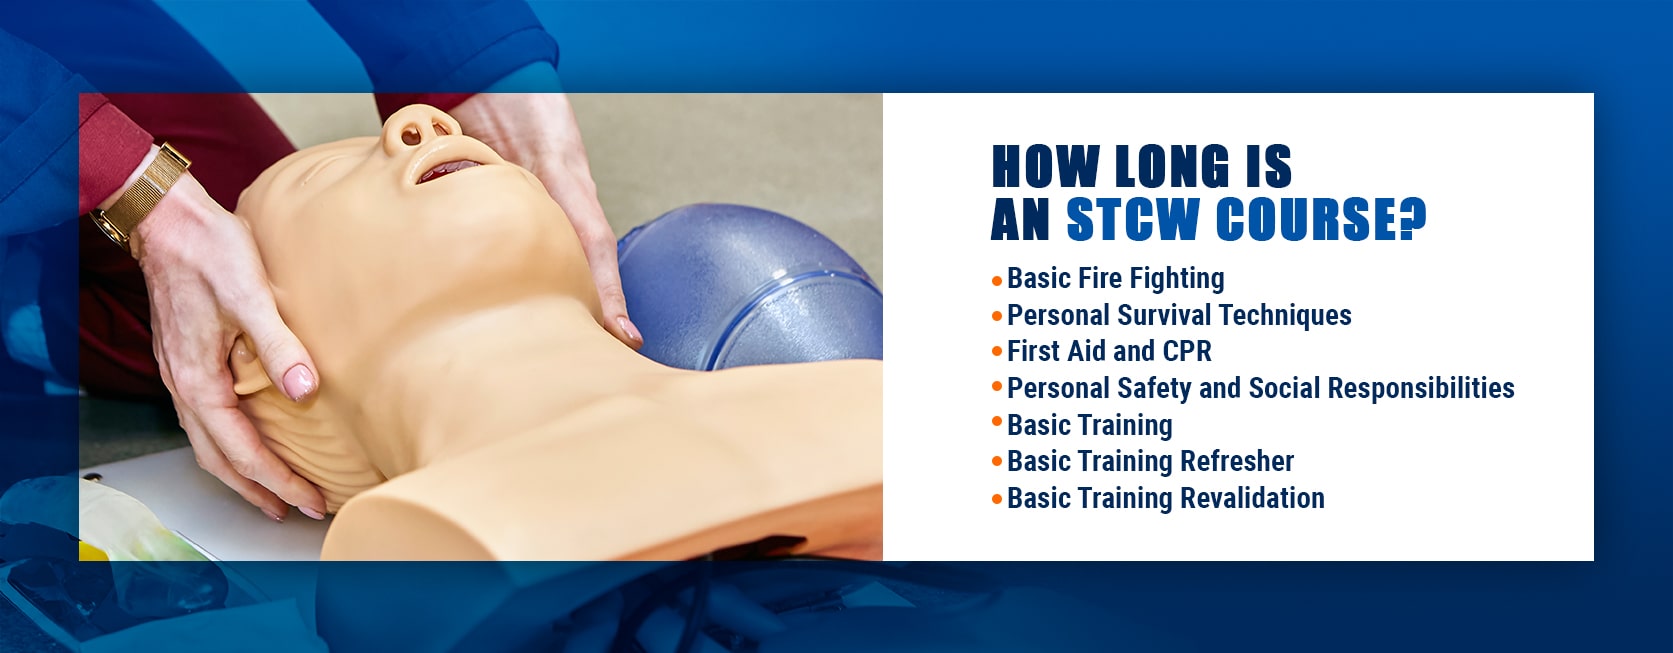 How Long Is an STCW Basic Training Course?